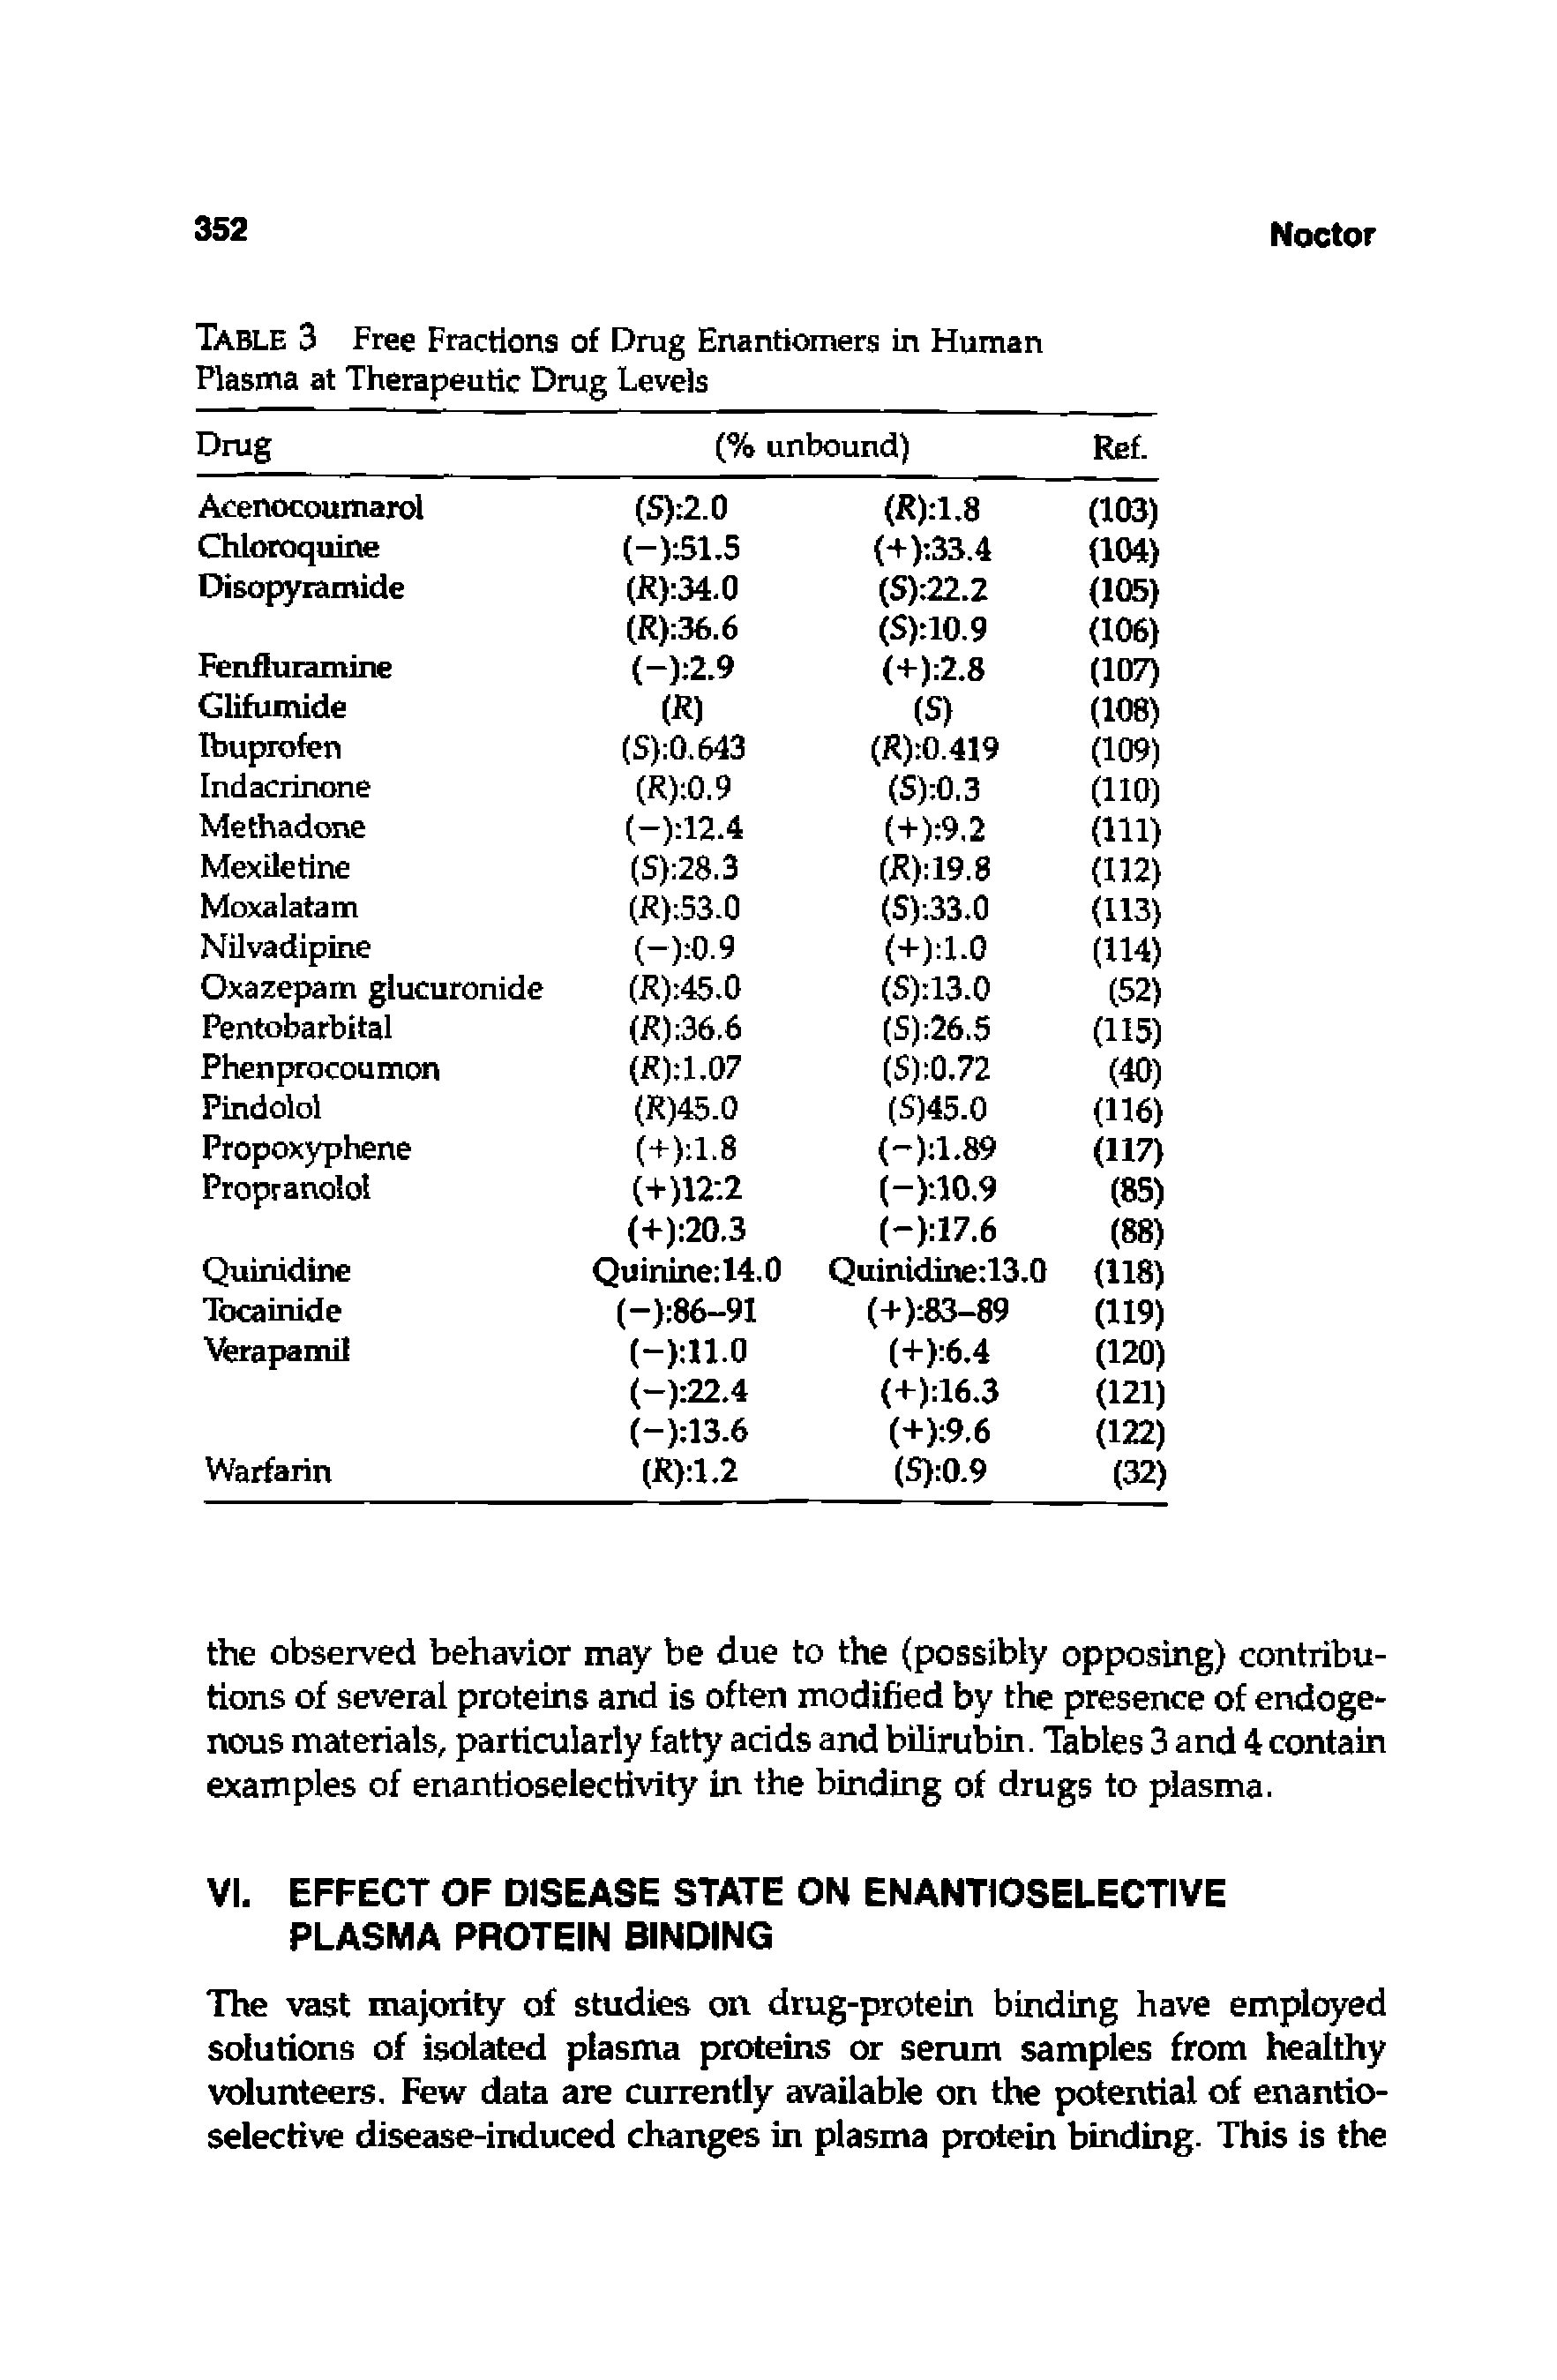 Table 3 Free Fracrions of Drug Enantiomers in Human Plasma at Therapeutic Drug Levels...